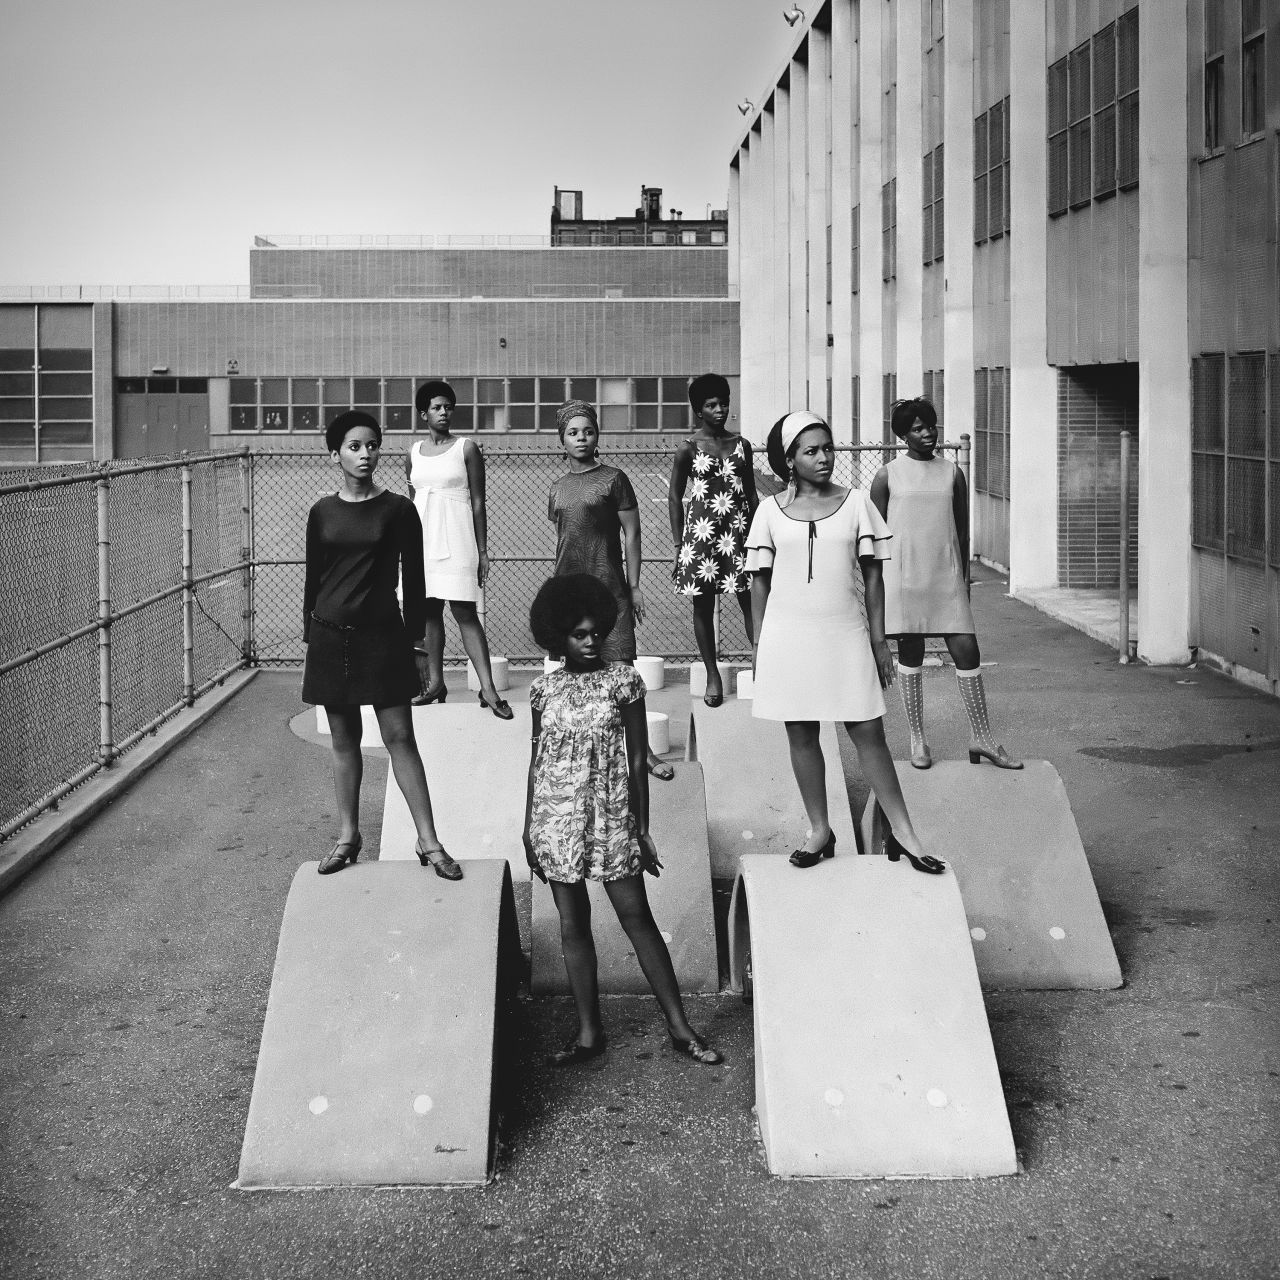 Photo shoot at a public school for one of the AJASS-associated modeling groups that emulated the Grandassa Models and began to embrace natural hairstyles. Harlem (c. 1966)